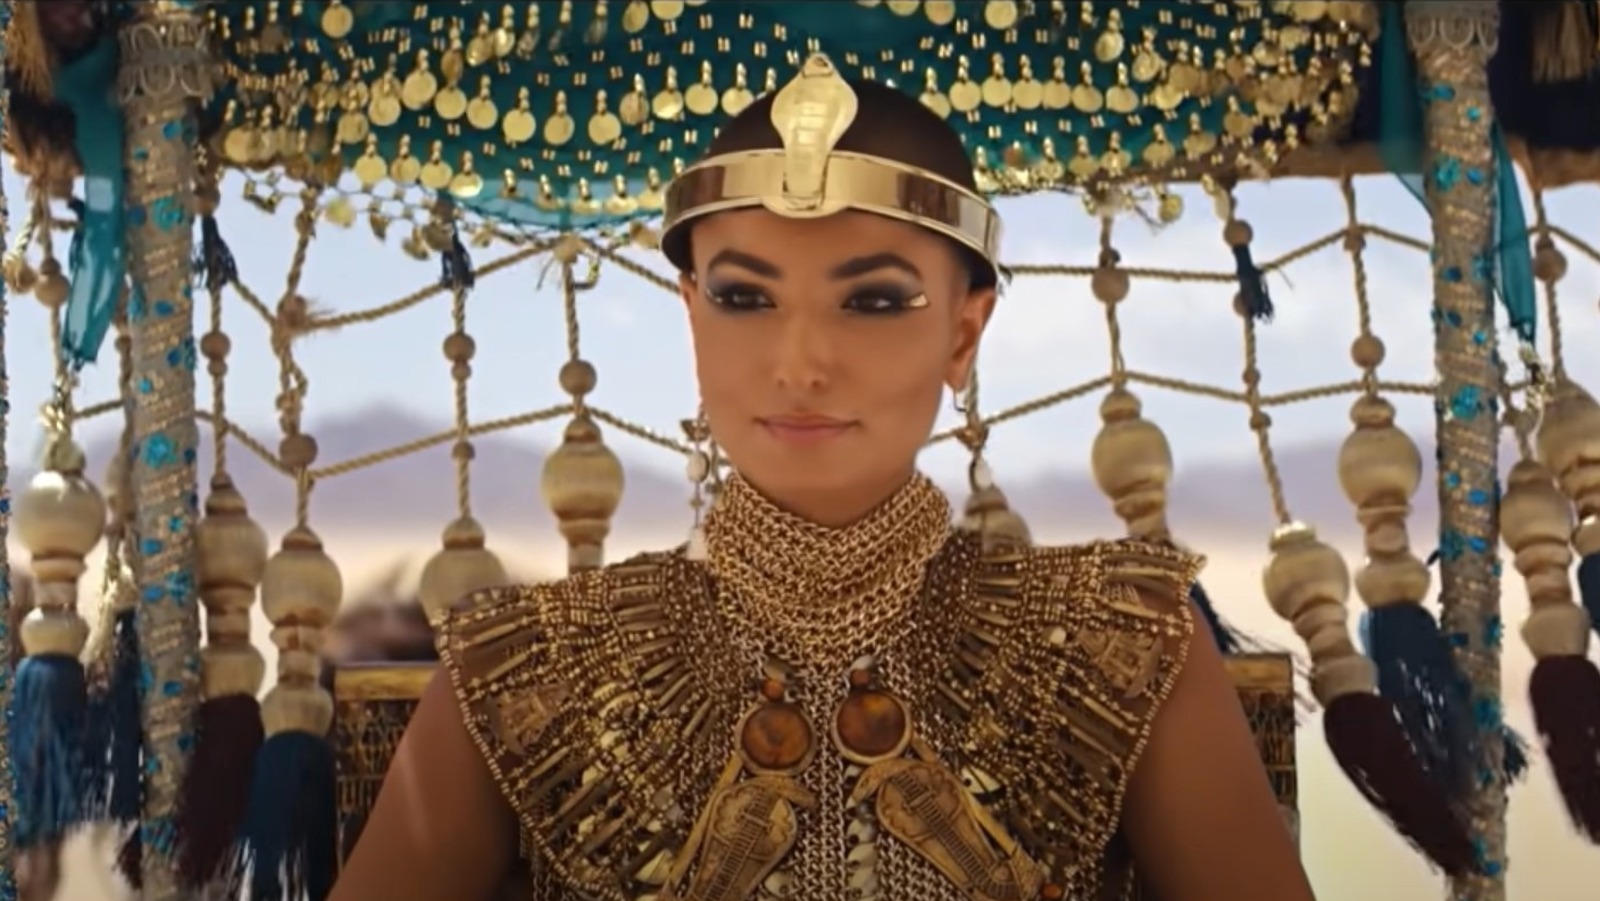 Why The Song In Amazon Prime's Cleopatra Commercial Sounds So Familiar